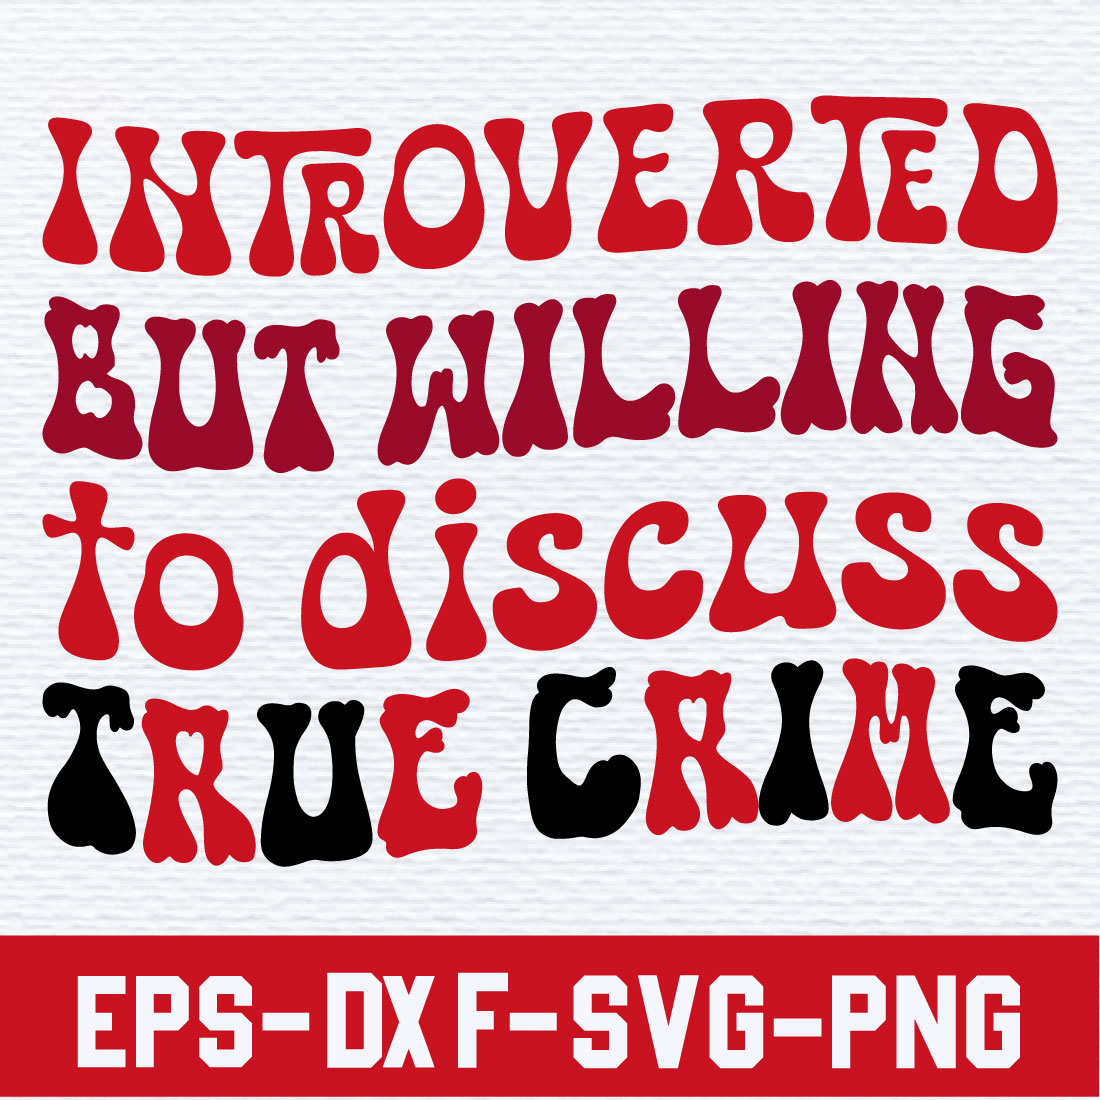 Introverted but willing to discuss True Crime preview image.